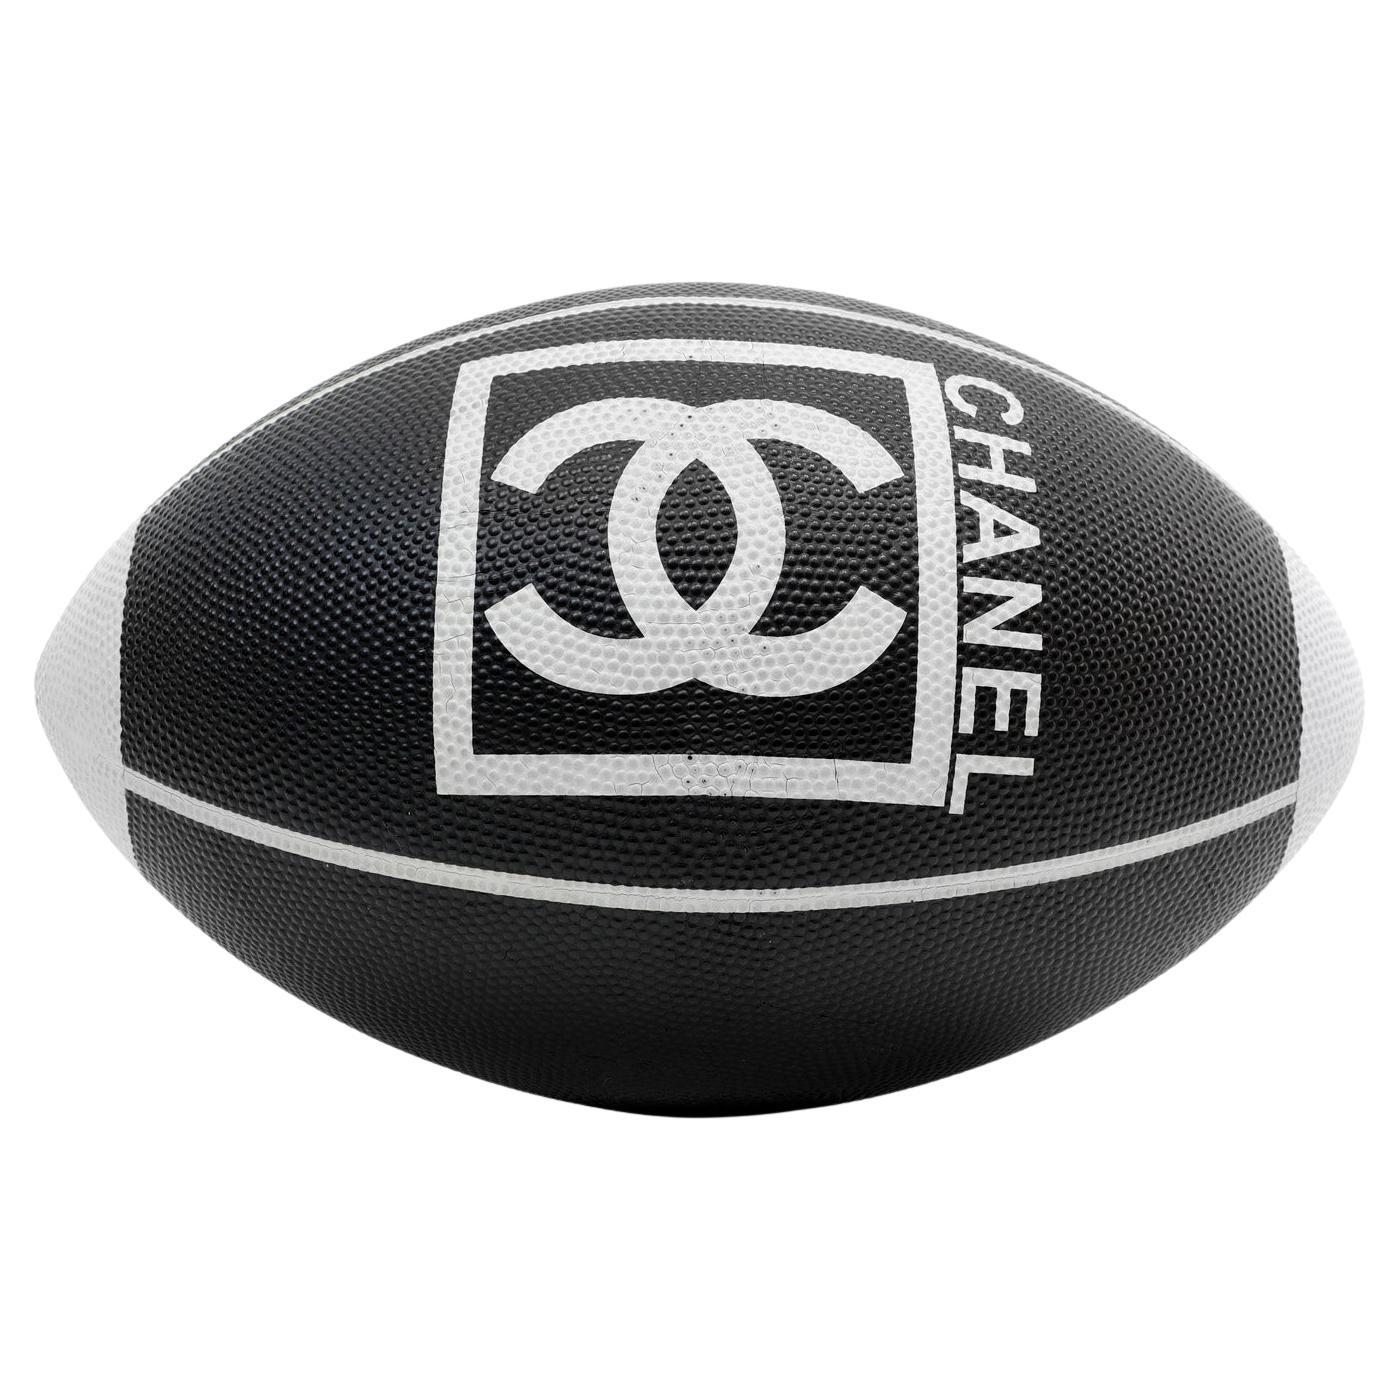 Chanel Black and White Game Series Rugby Football For Sale